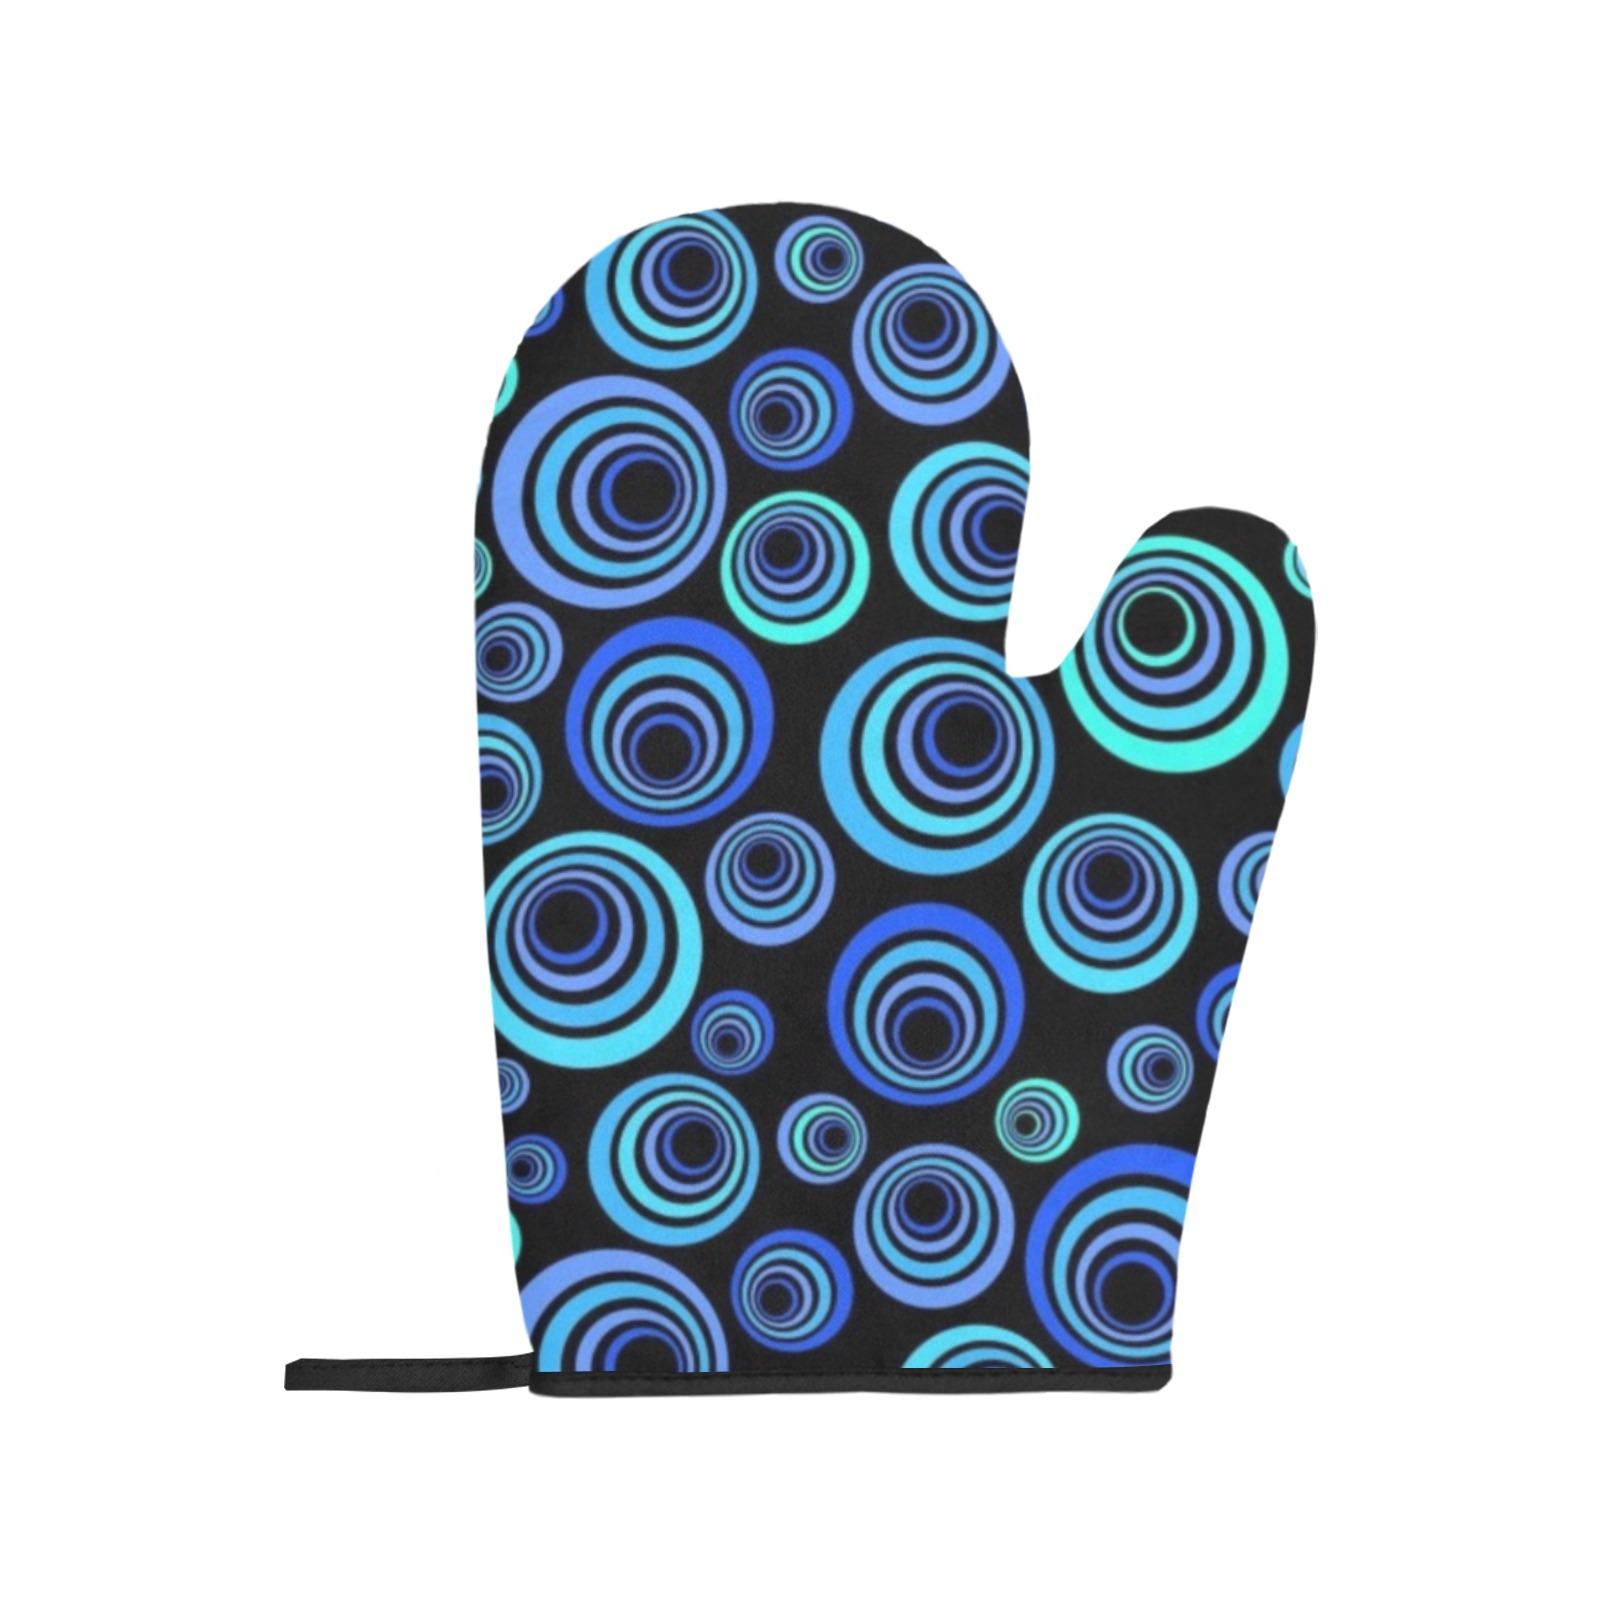 Retro Psychedelic Pretty Blue Pattern Oven Mitt (Two Pieces)